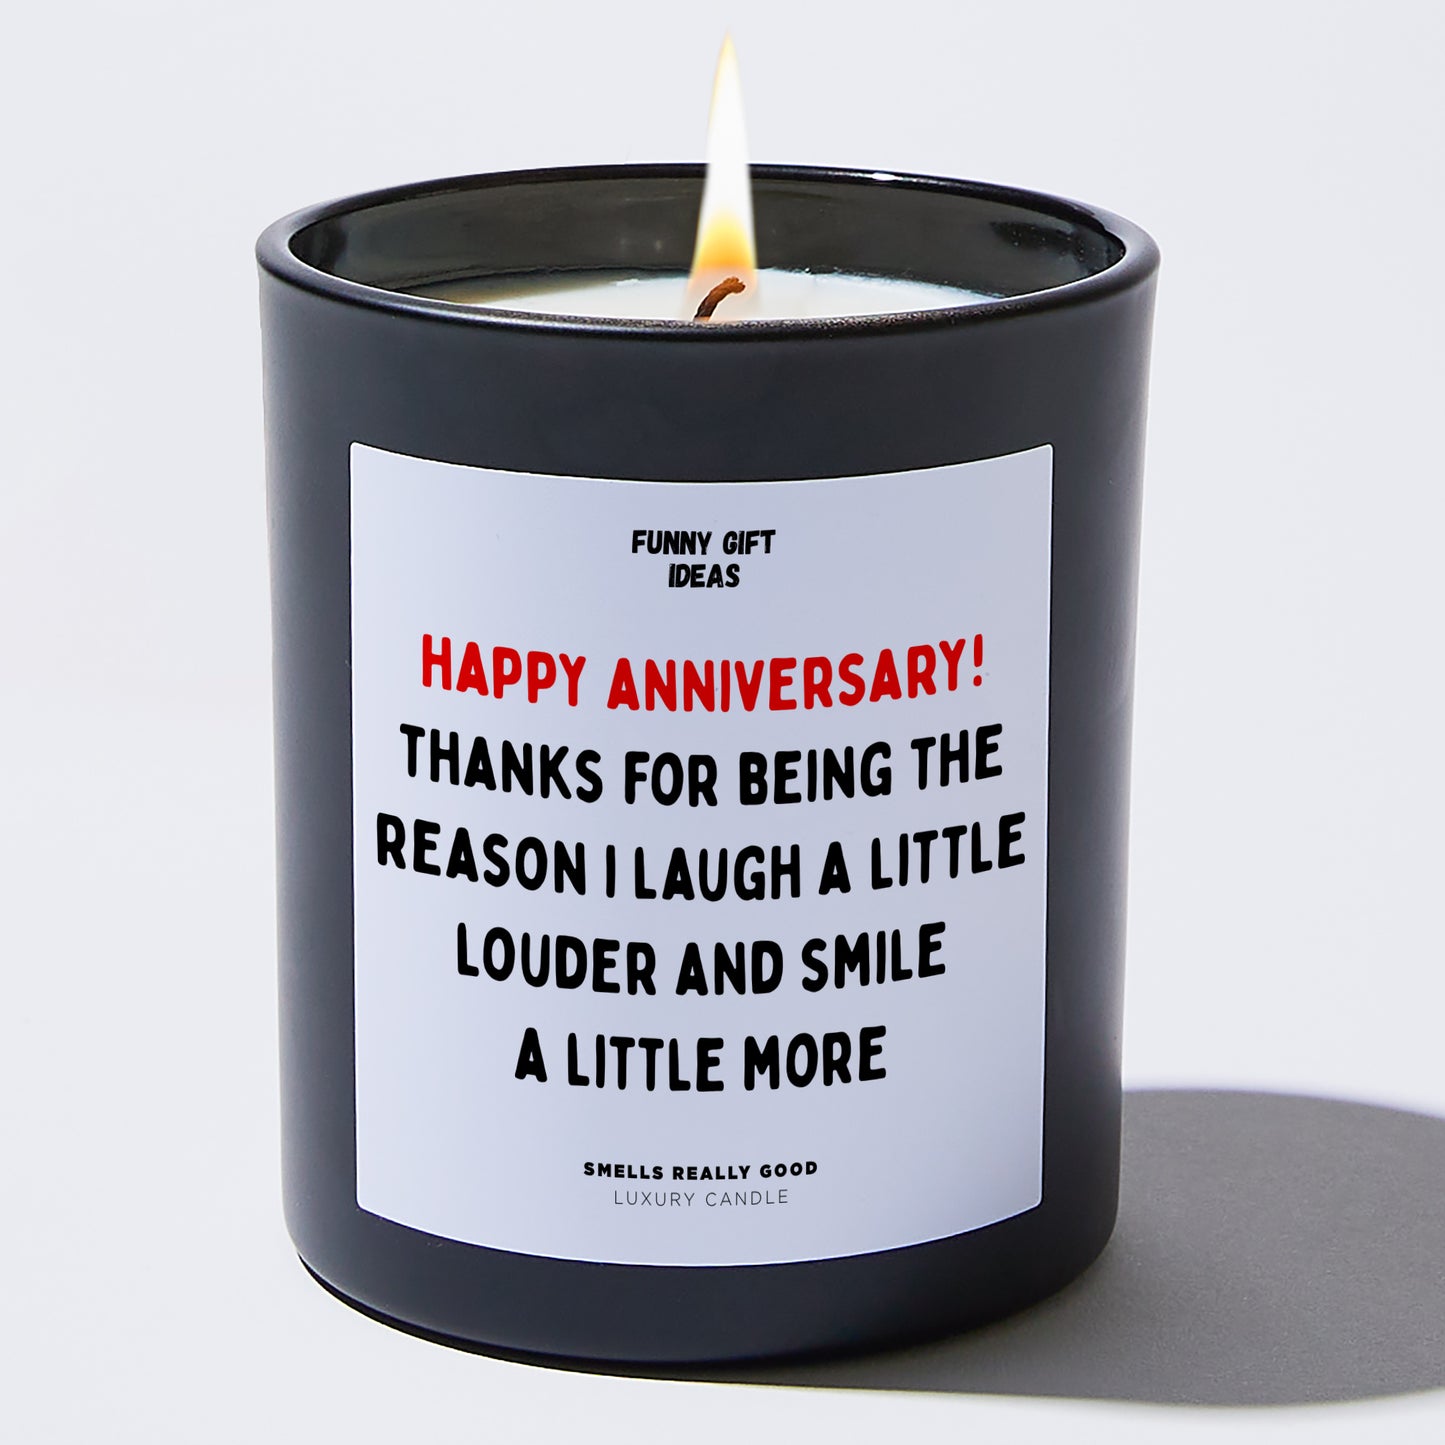 Anniversary Present - Happy Anniversary! Thanks for Being the Reason I Laugh a Little Louder and Smile a Little More. - Candle